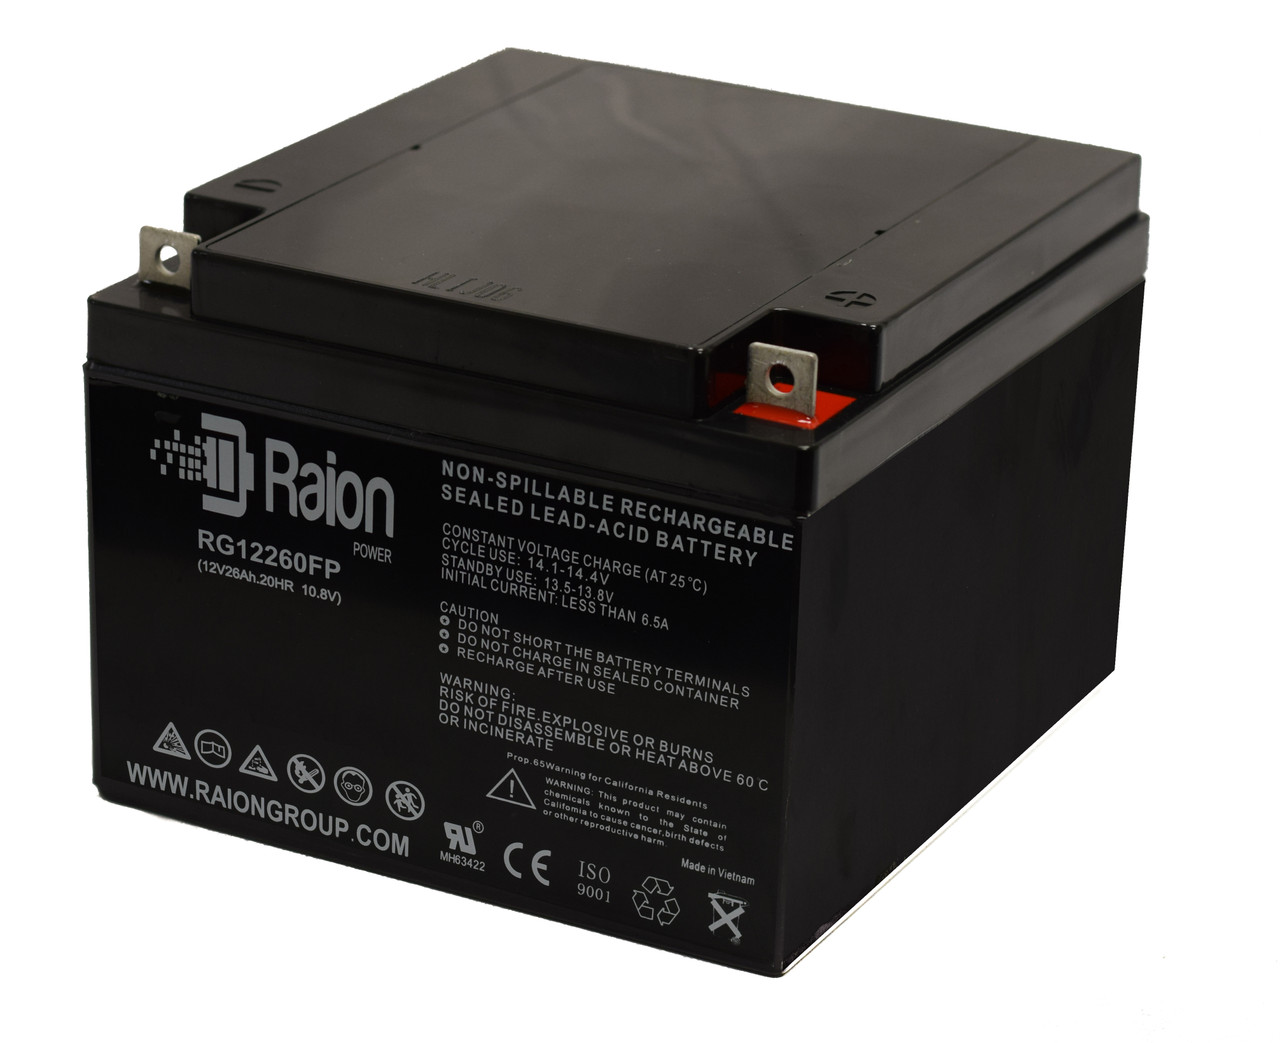 Raion Power Replacement 12V 26Ah Battery for Telong TL12240A - 1 Pack